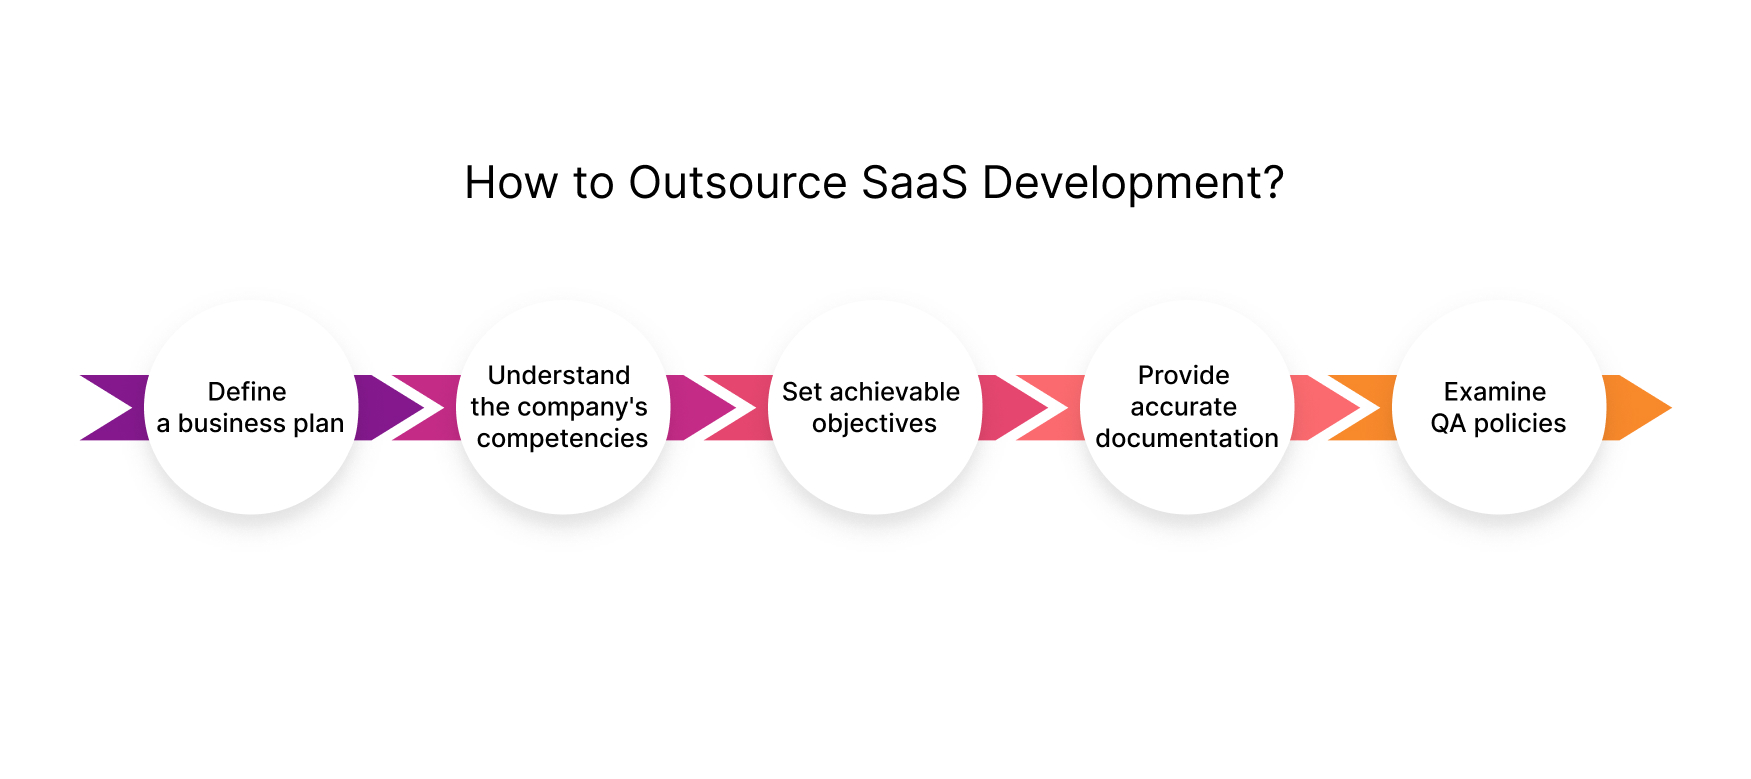 how to outsource saas development